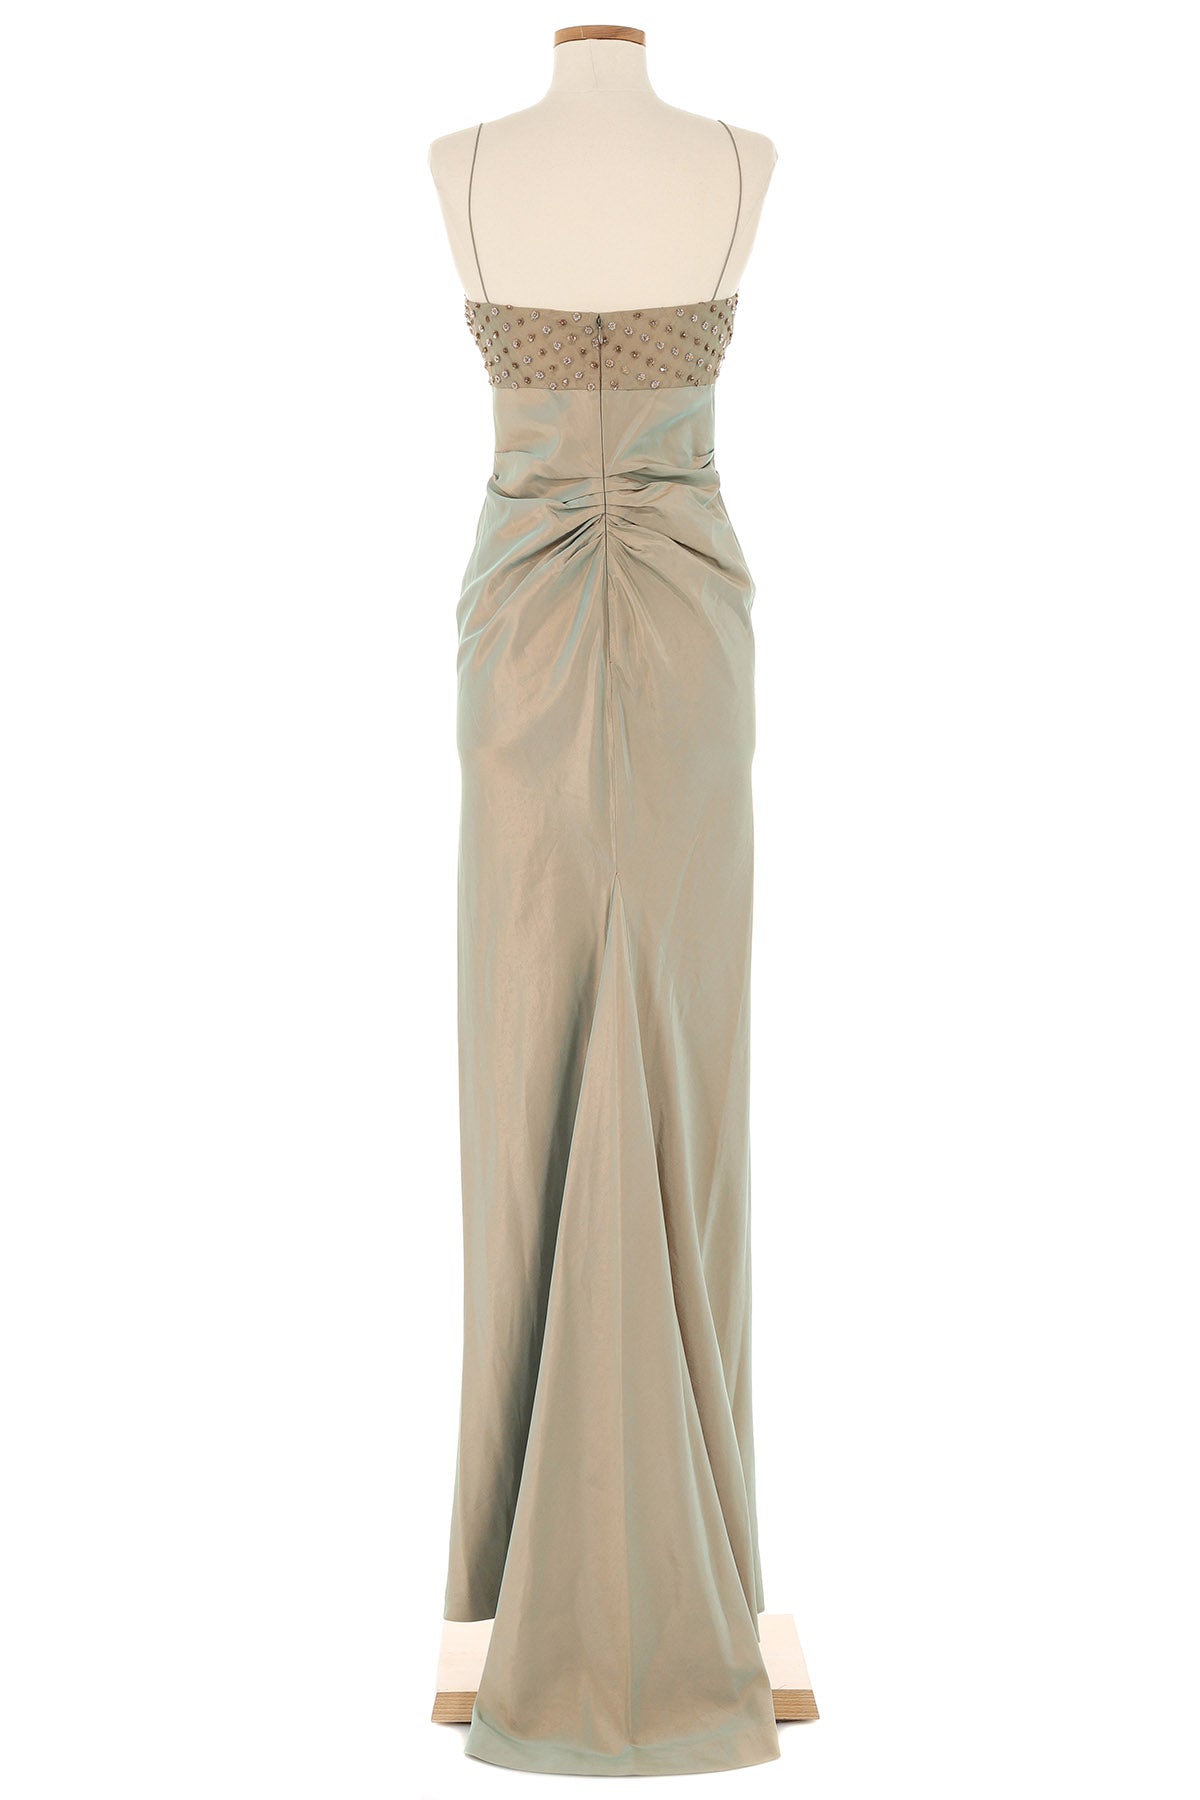 Richard Tyler Couture Embellished Gown